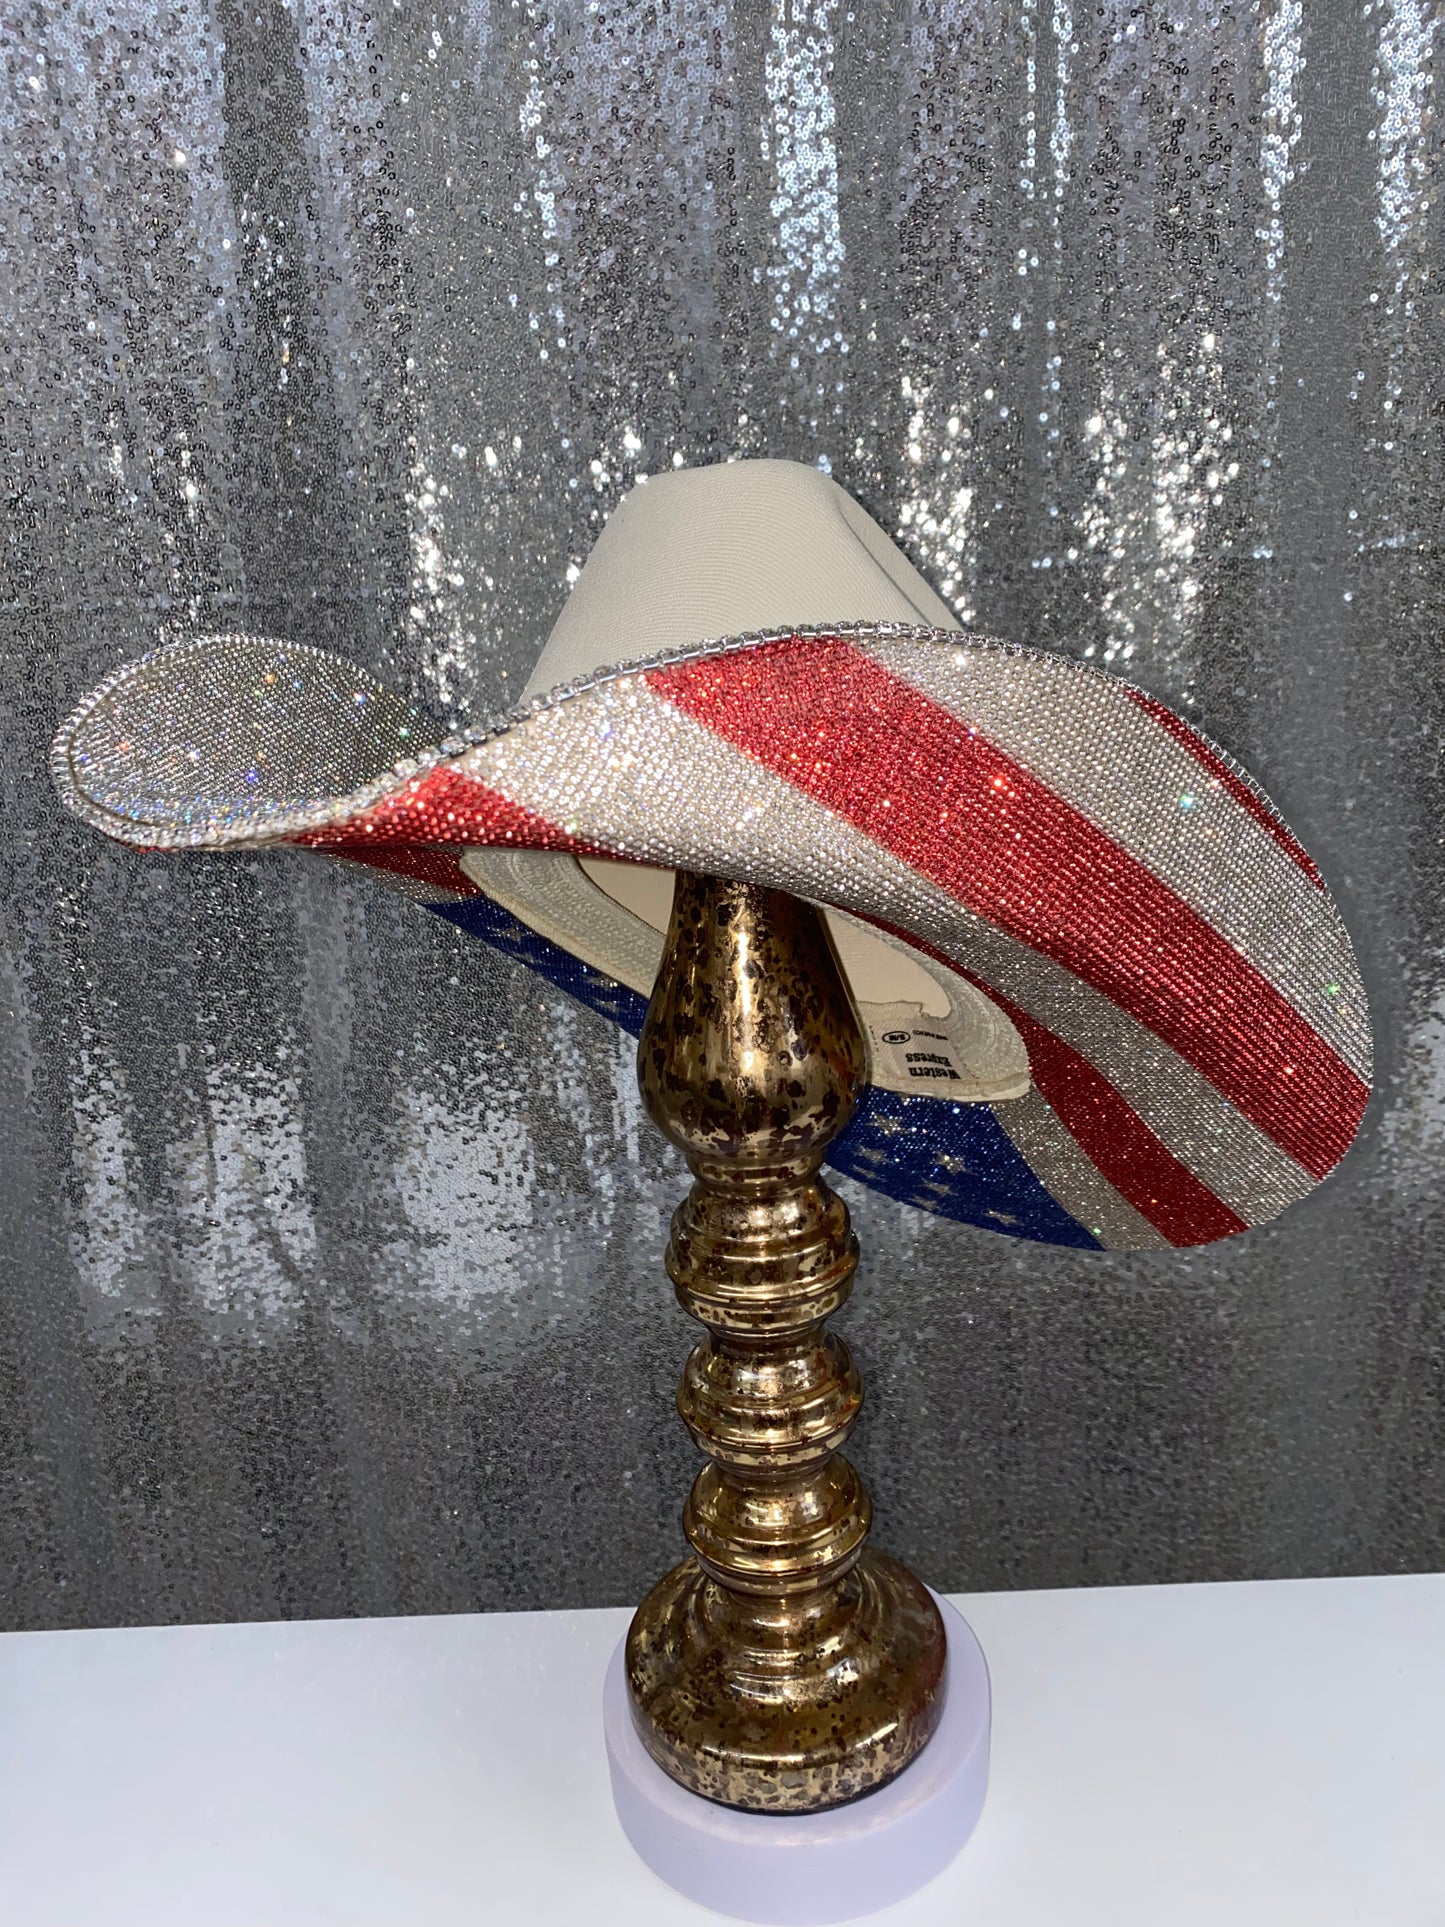 The "America" Hat on Sand Squared Styled Hat